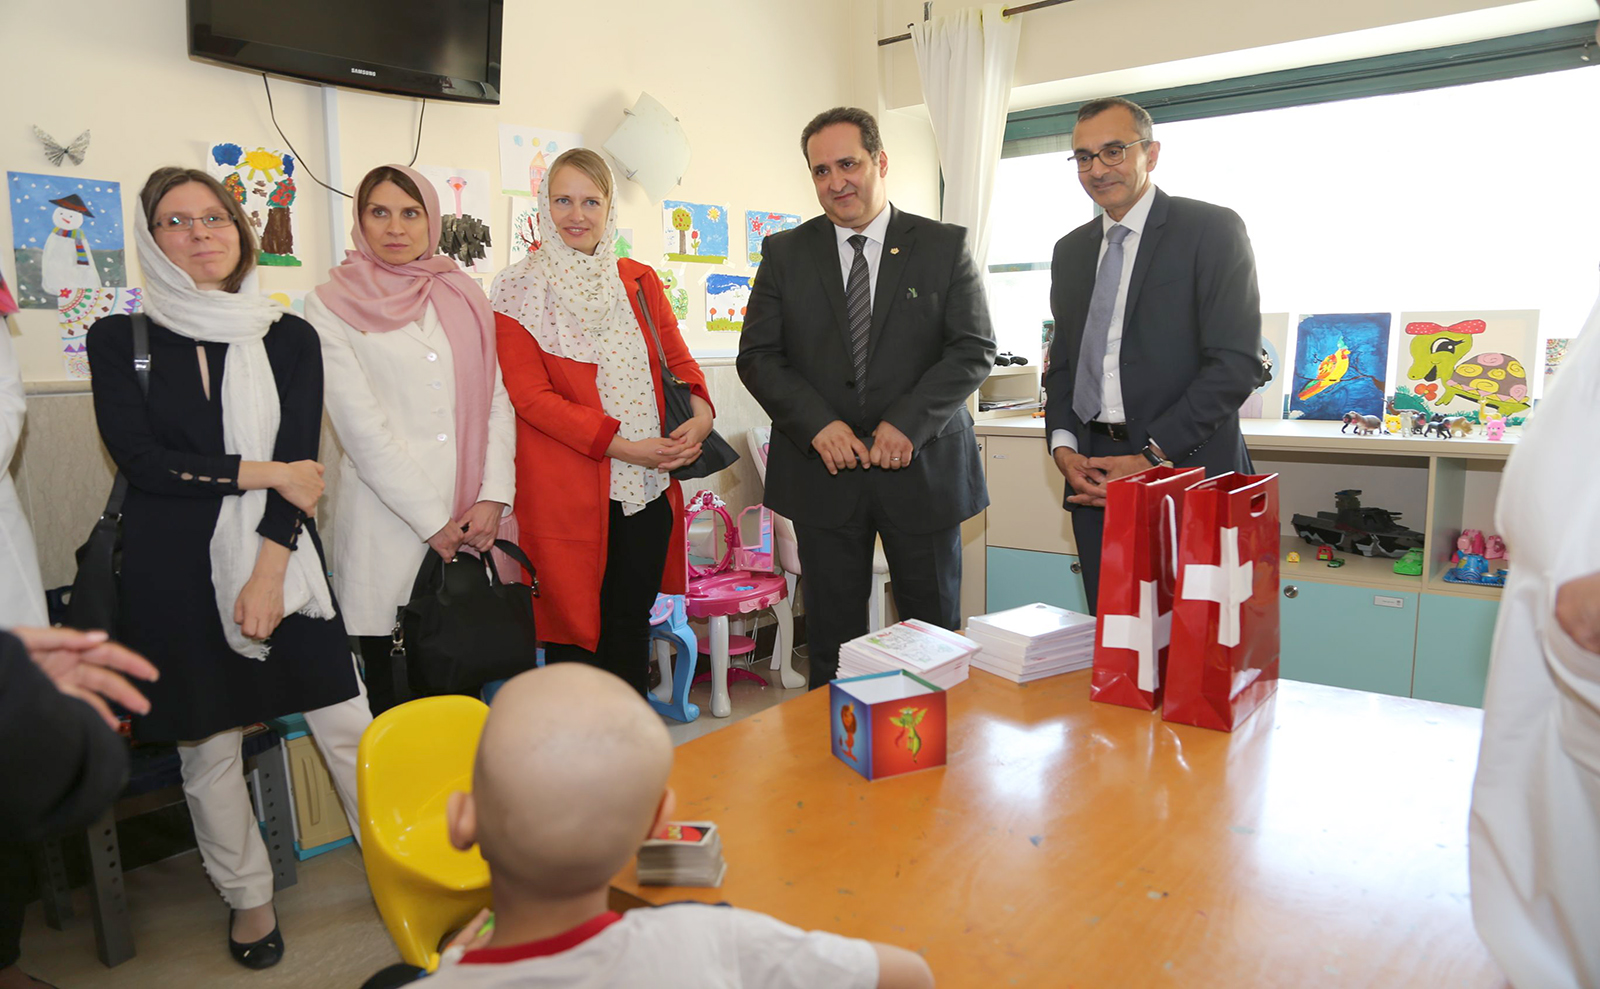 The visit of the Swiss ambassador and the representative of the Ministry of Health in June 2018